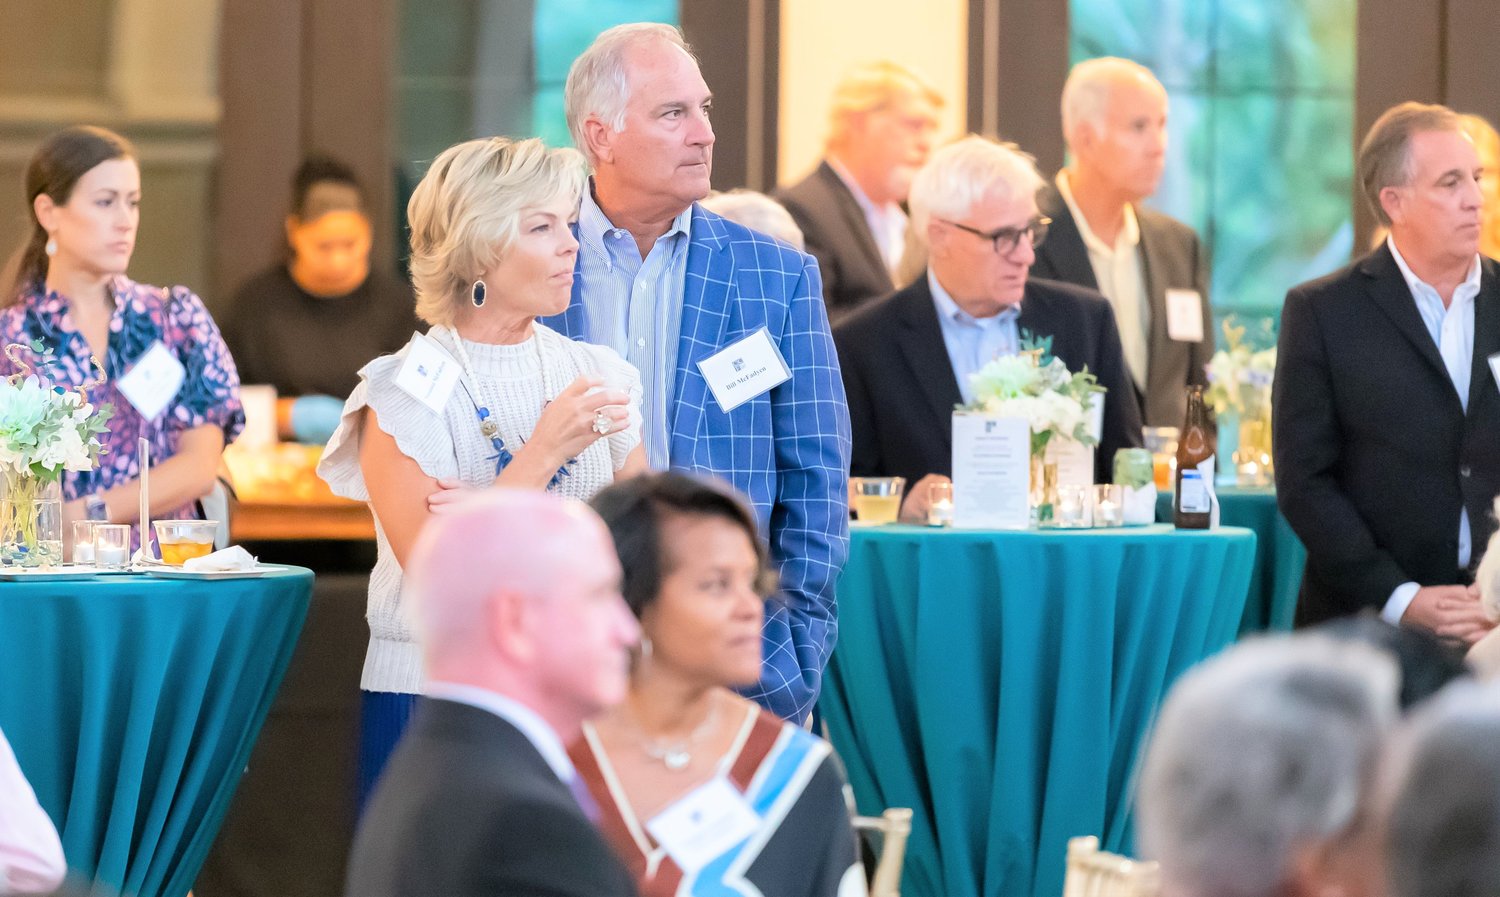 The Cumberland Community Foundation on Thursday evening awarded grants and scholarships totaling $684,060 in a ceremony at Cape Fear Botanical Garden.